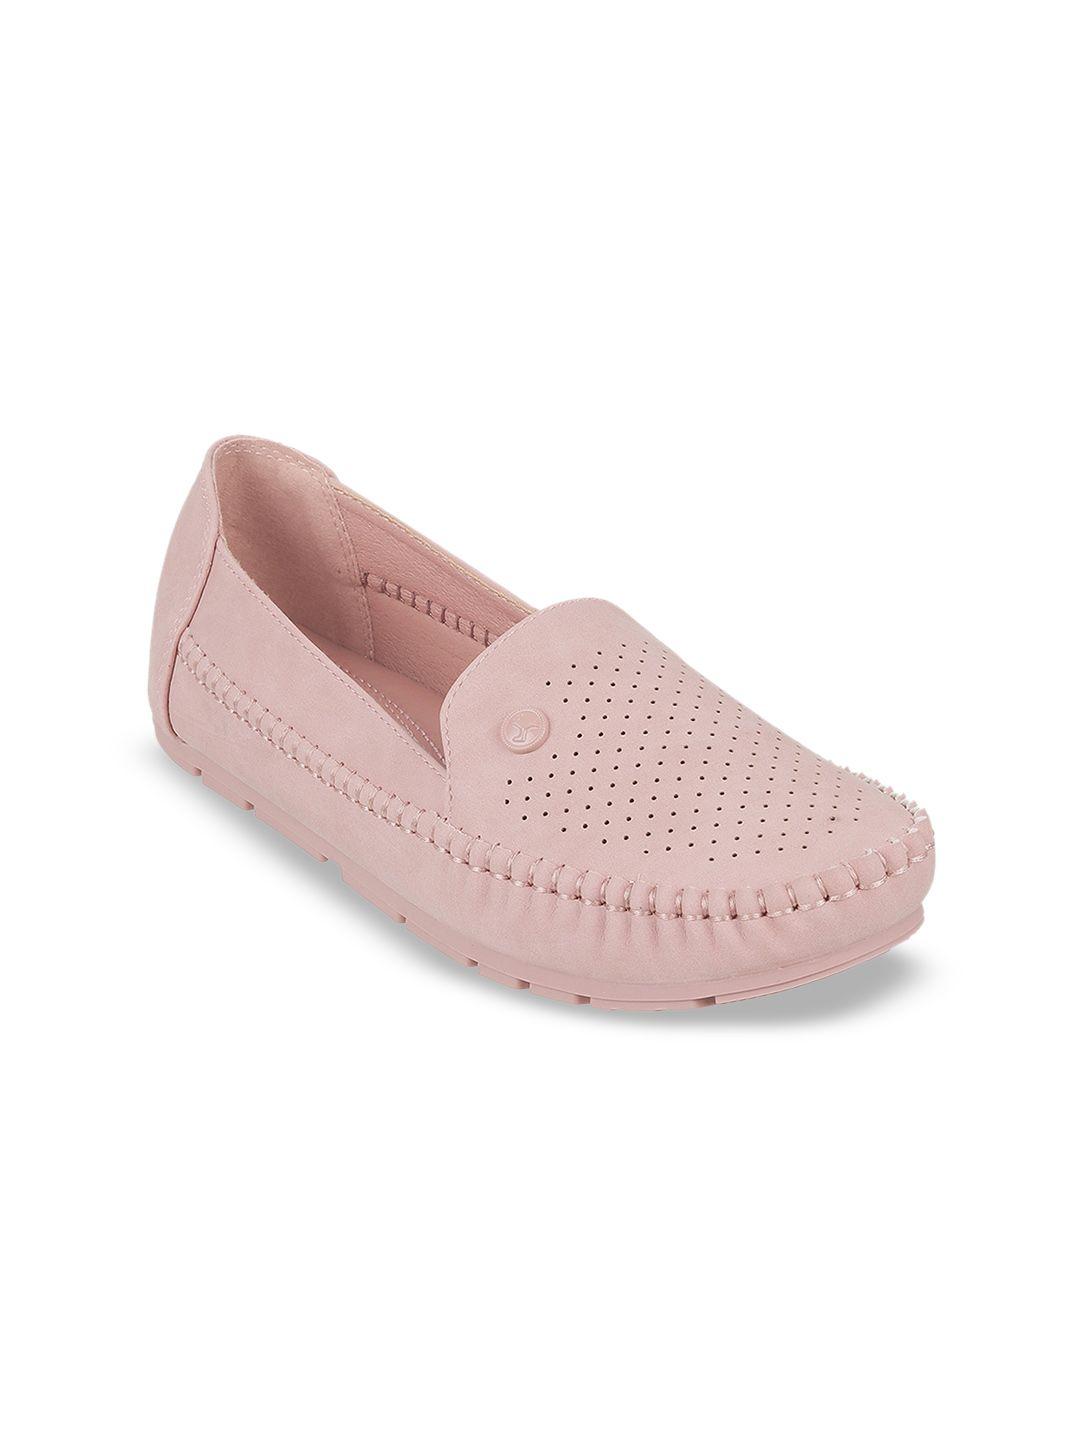 mochi-women-perforations-loafers